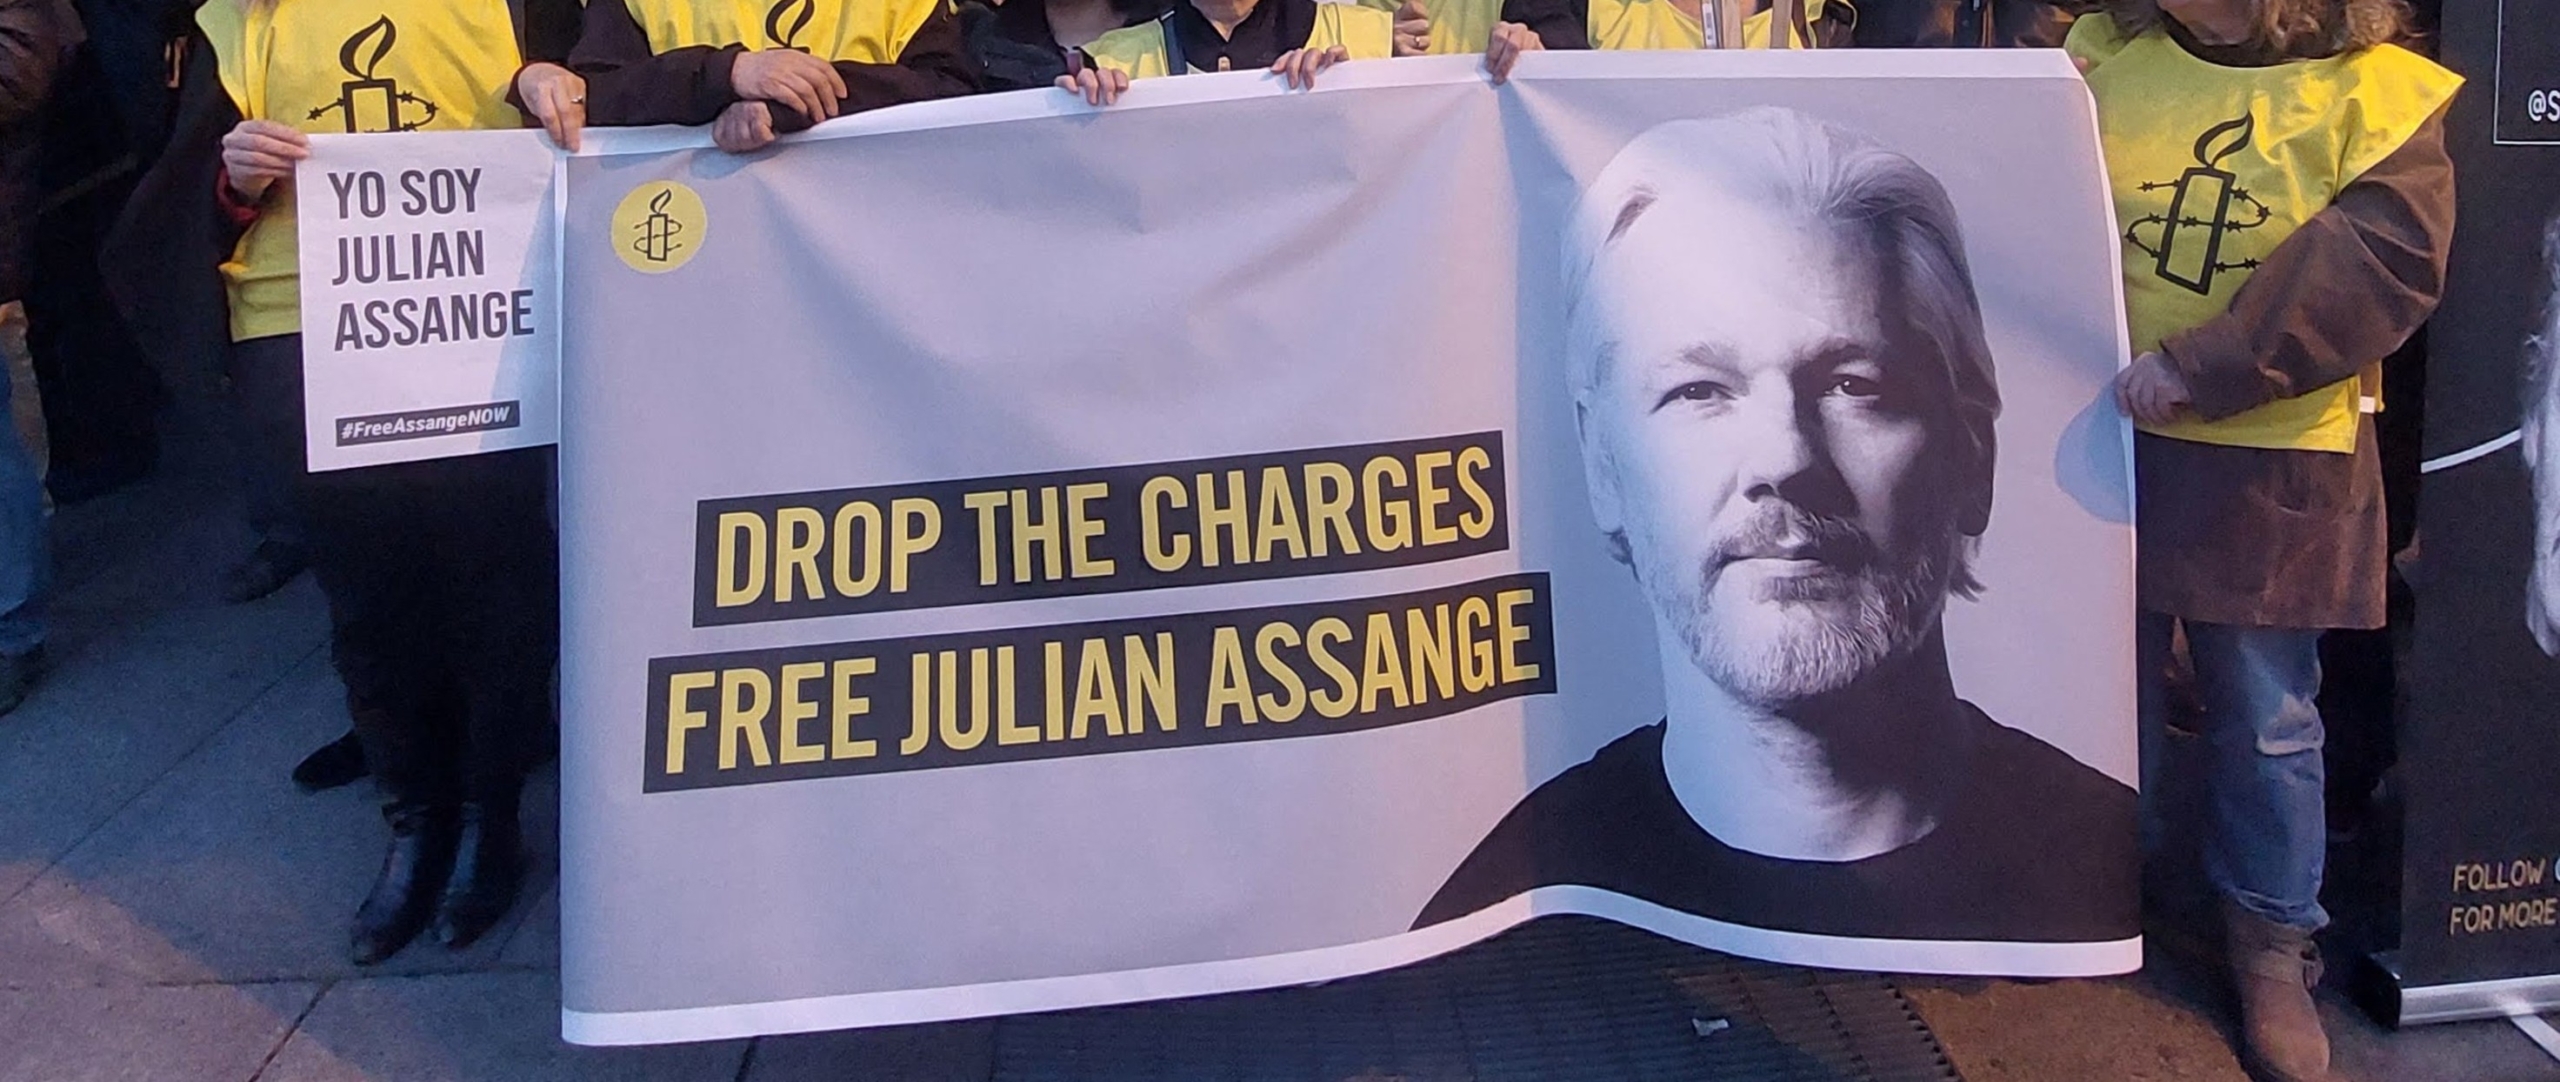 UK/US: Five years in prison for Julian Assange in the UK is unacceptable